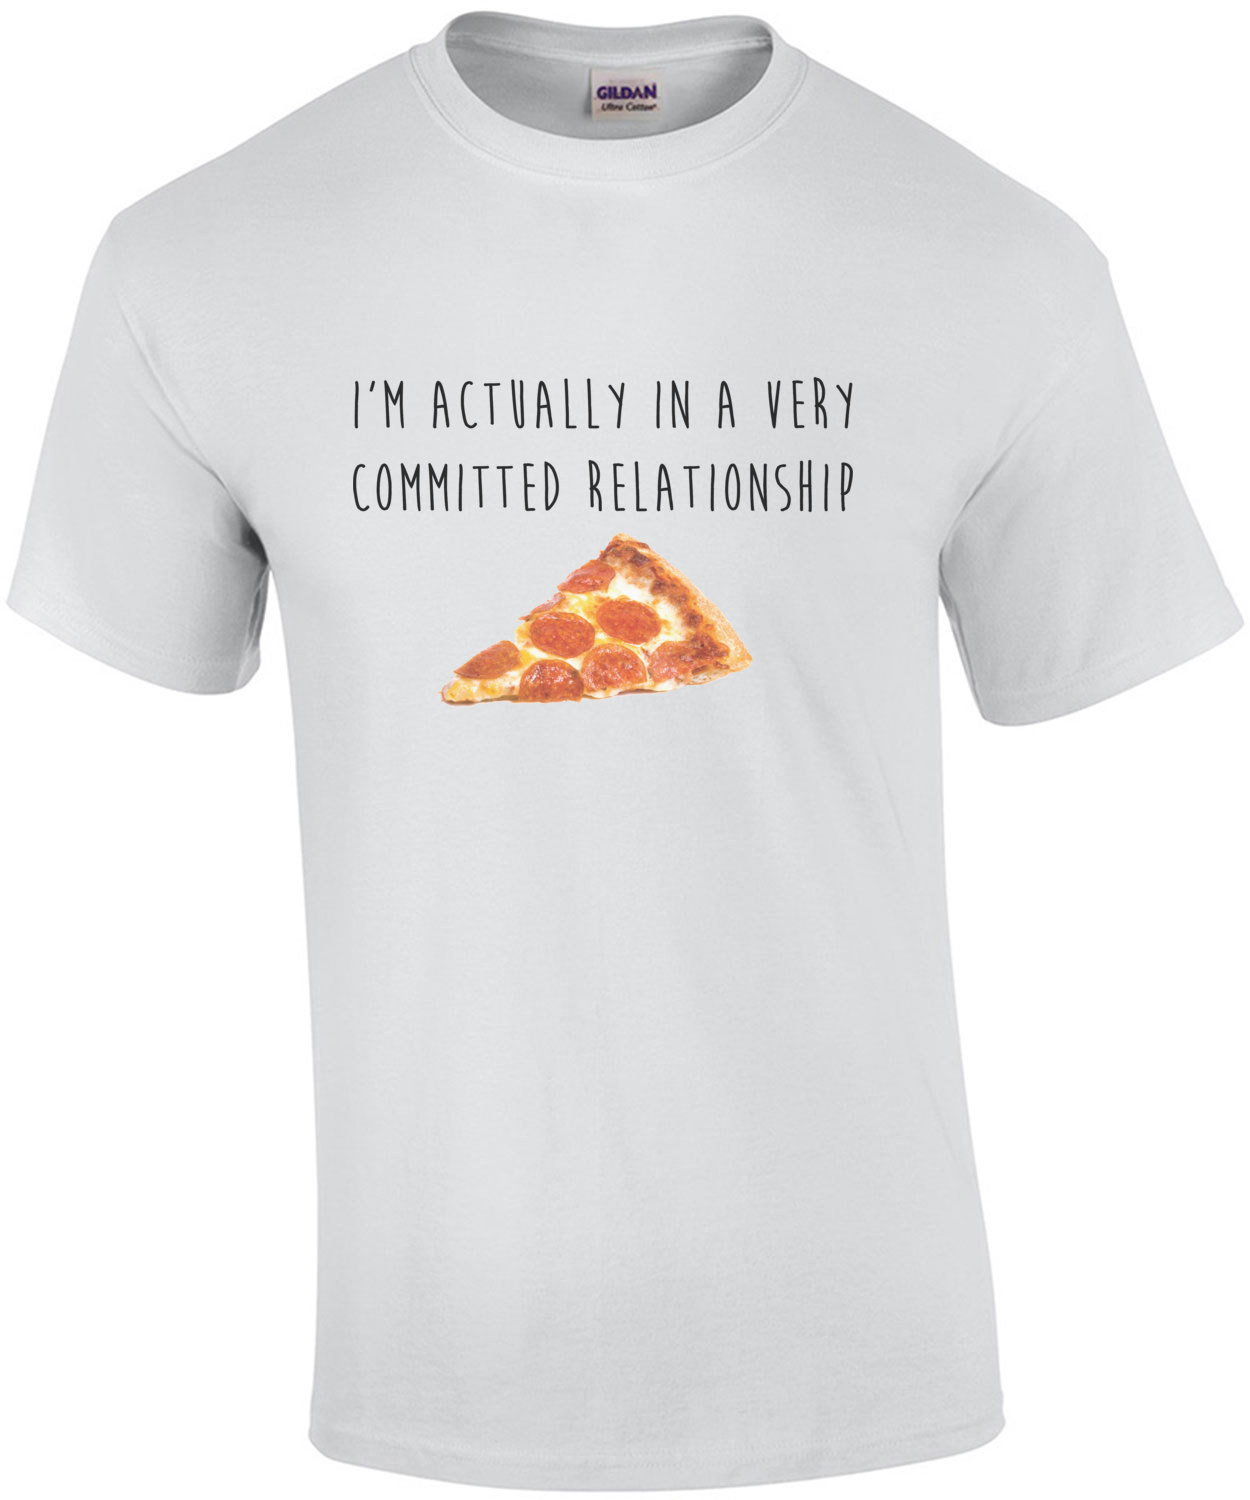 I'm actually in a very committed relationship - pizza